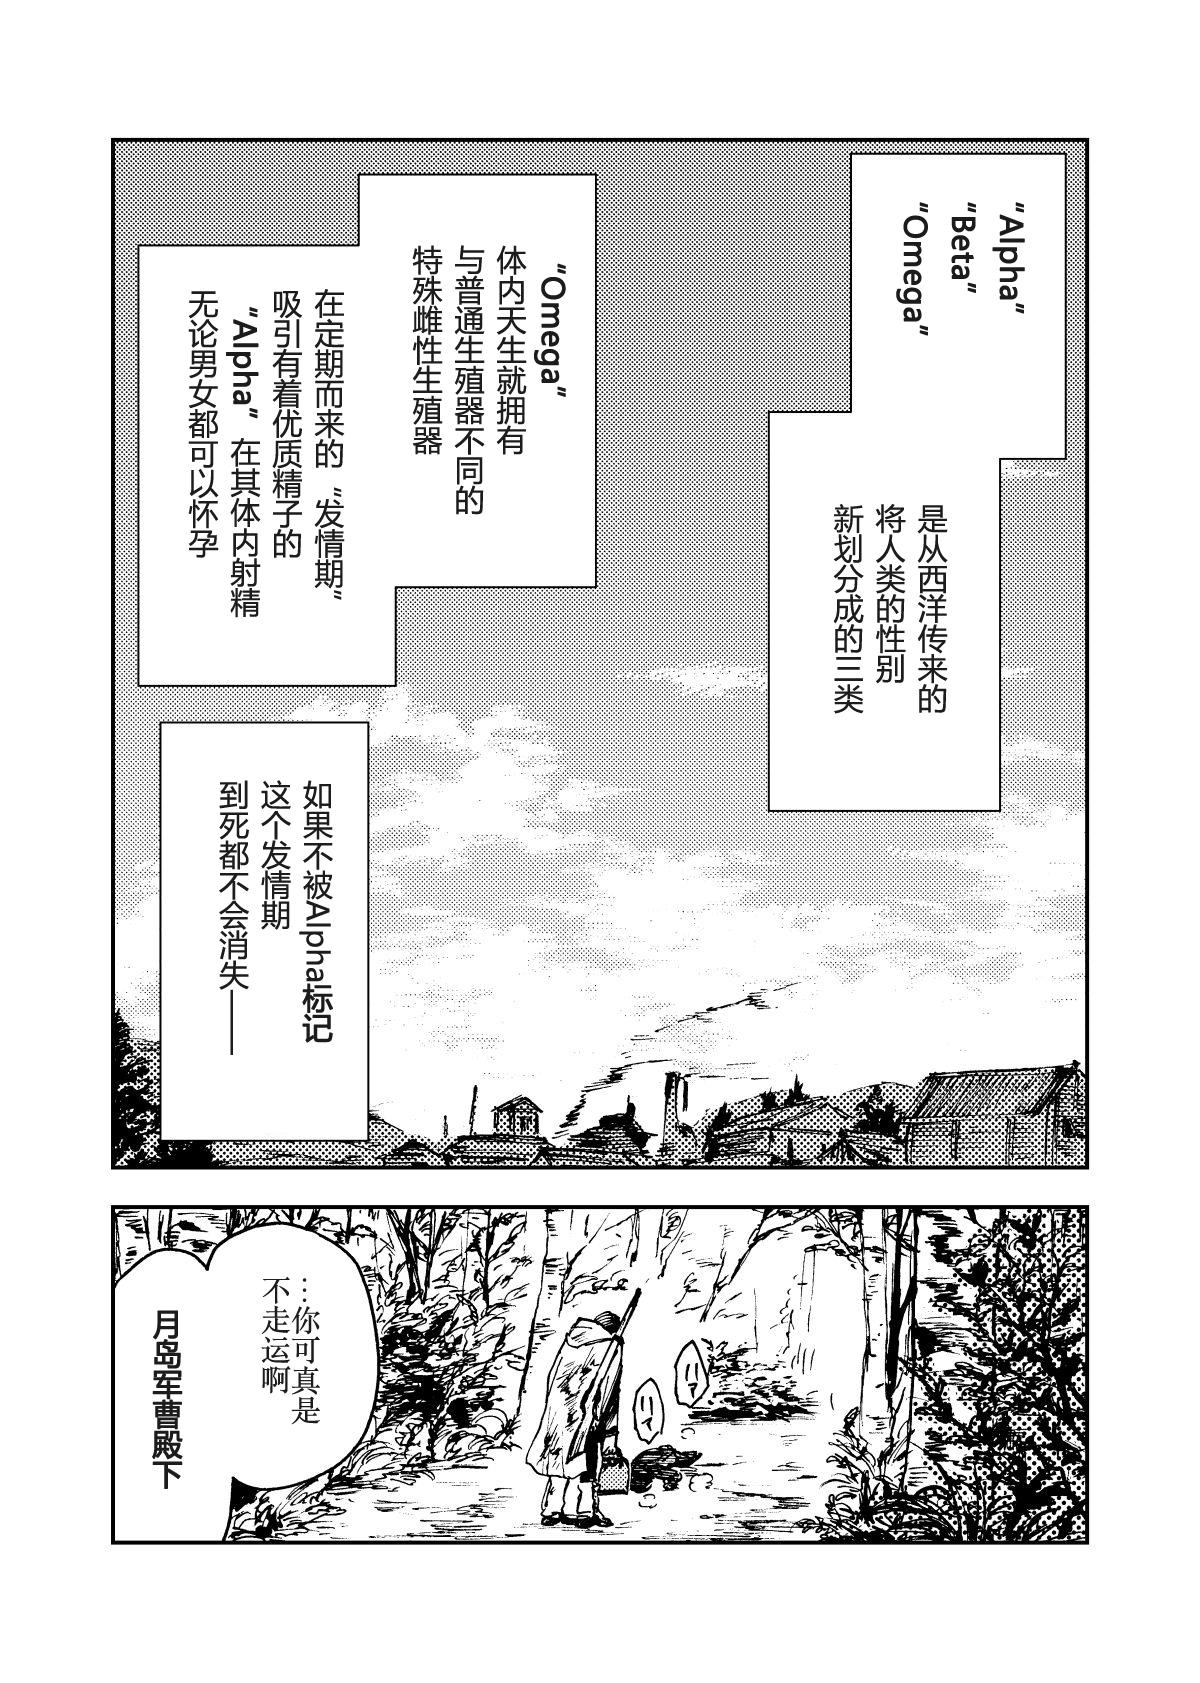 Orgame （自汉化）啸猫弄月（Chinese） - Golden kamuy Home - Page 2